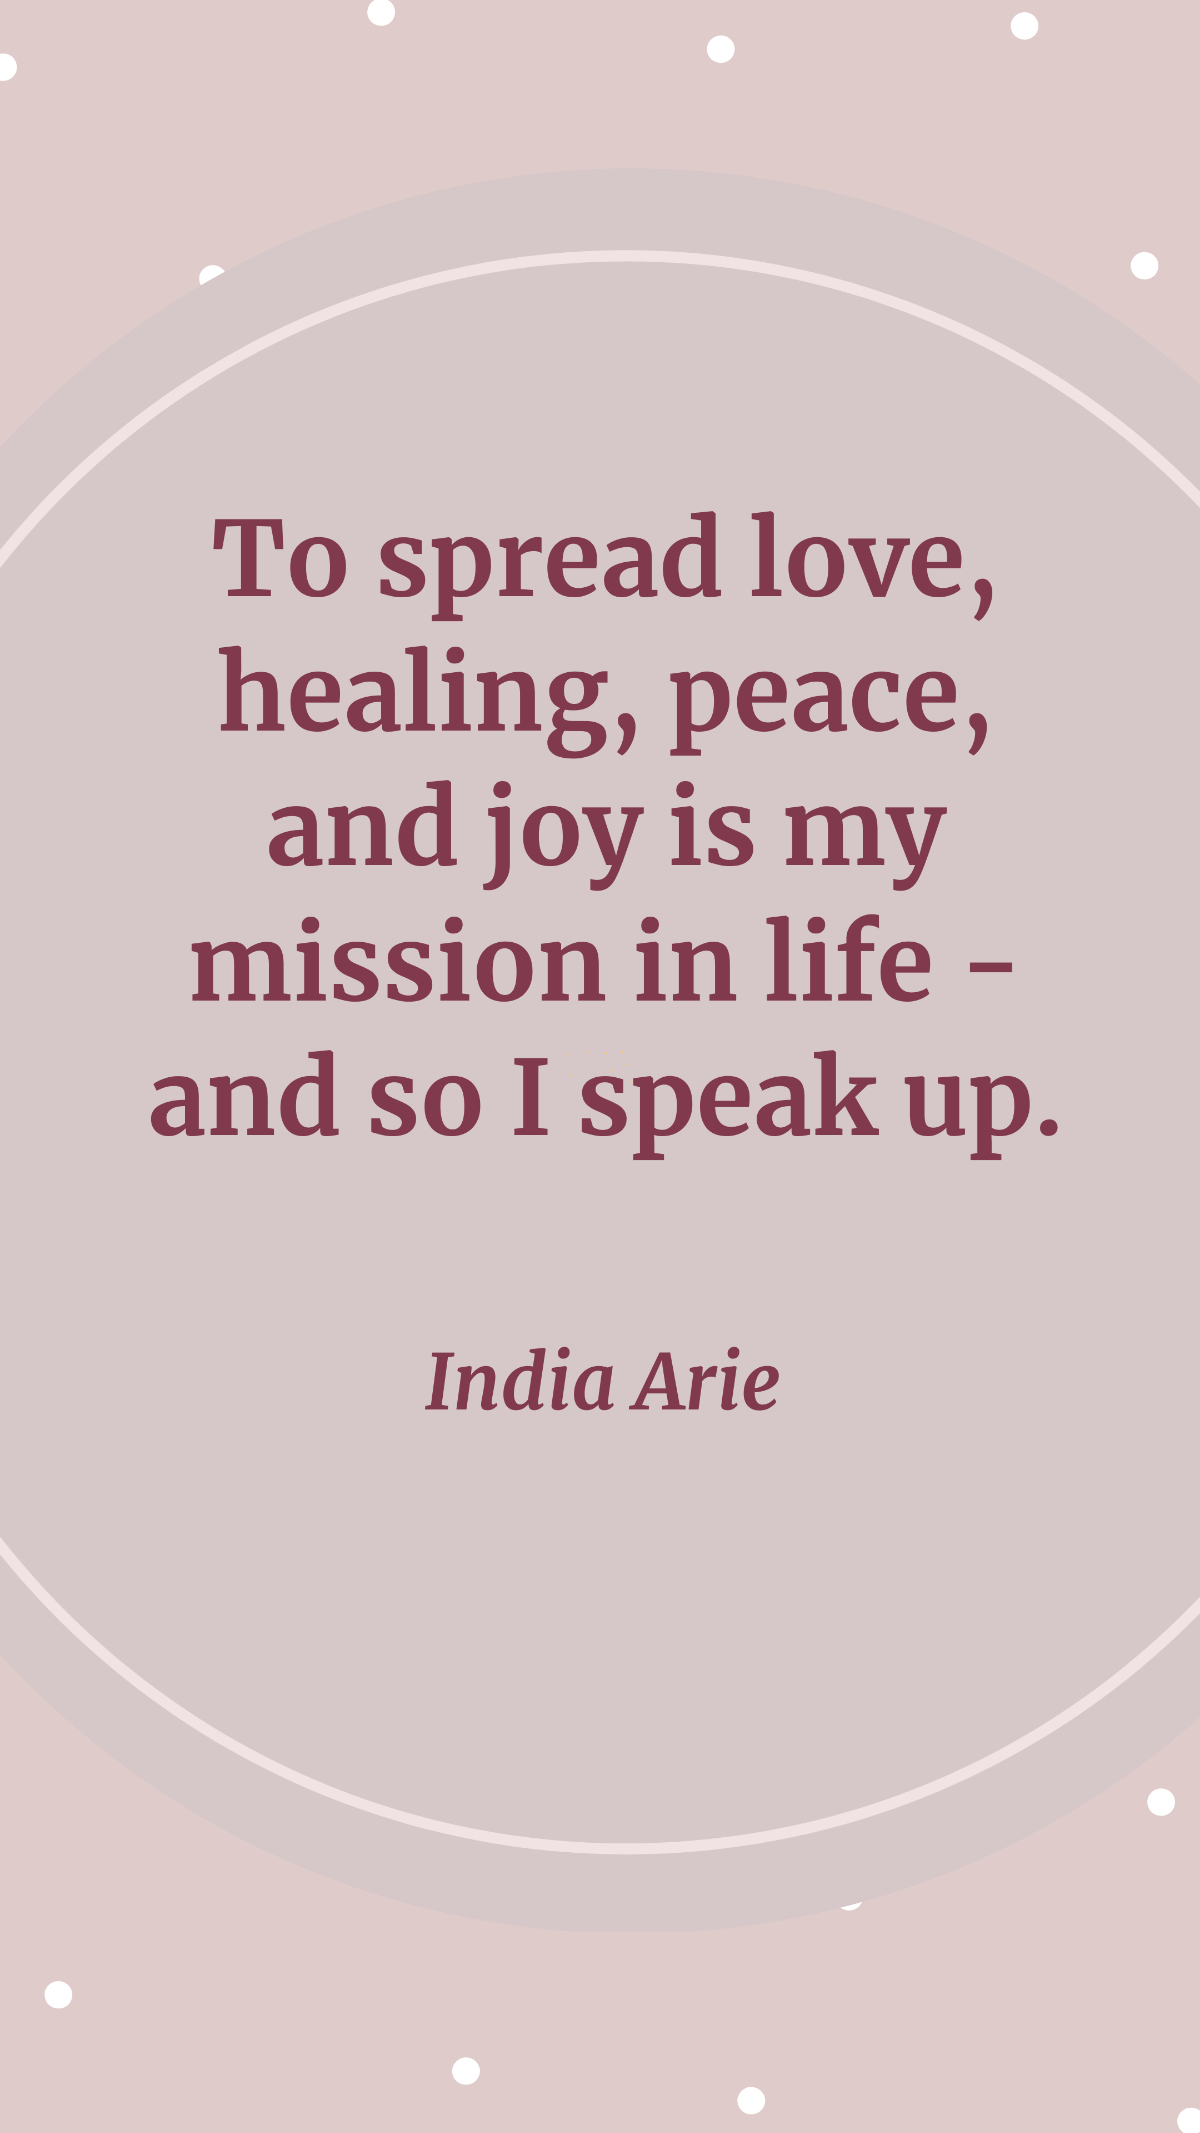 Free India Arie - To spread love, healing, peace, and joy is my mission in life - and so I speak up. Template